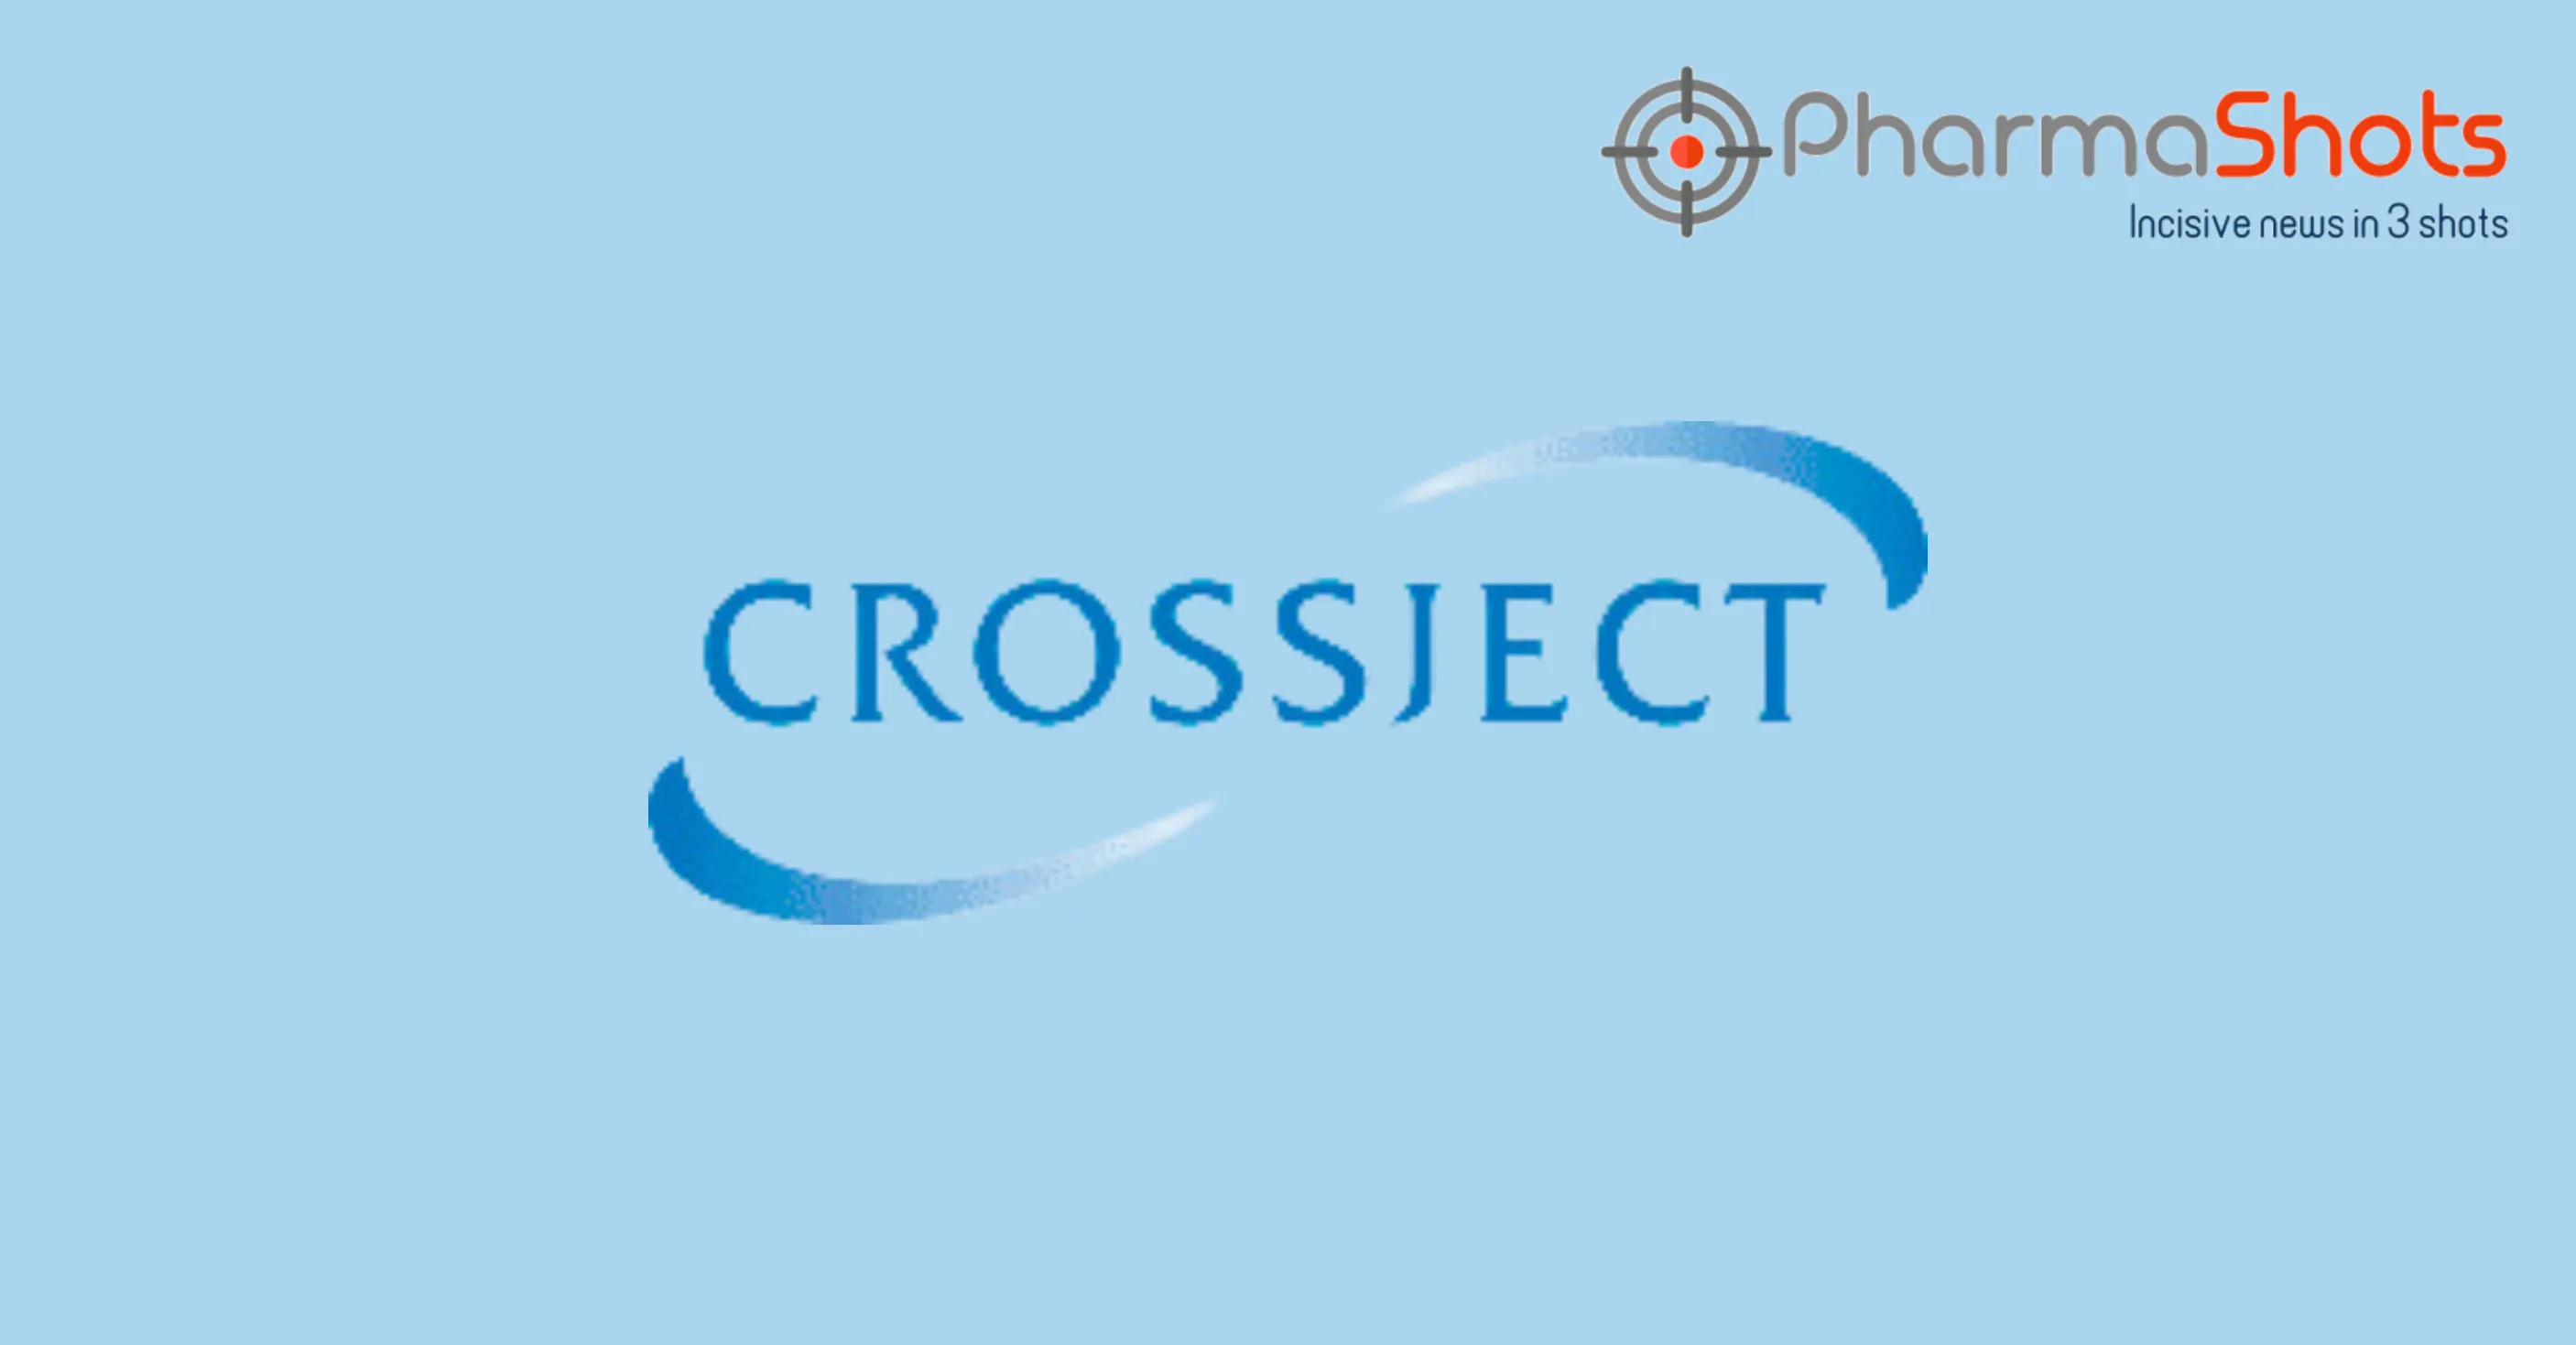 Crossject Collaborates with its Strategic Partner to Commercialize Zepizure Across Europe for the Treatment of Epileptic Seizures